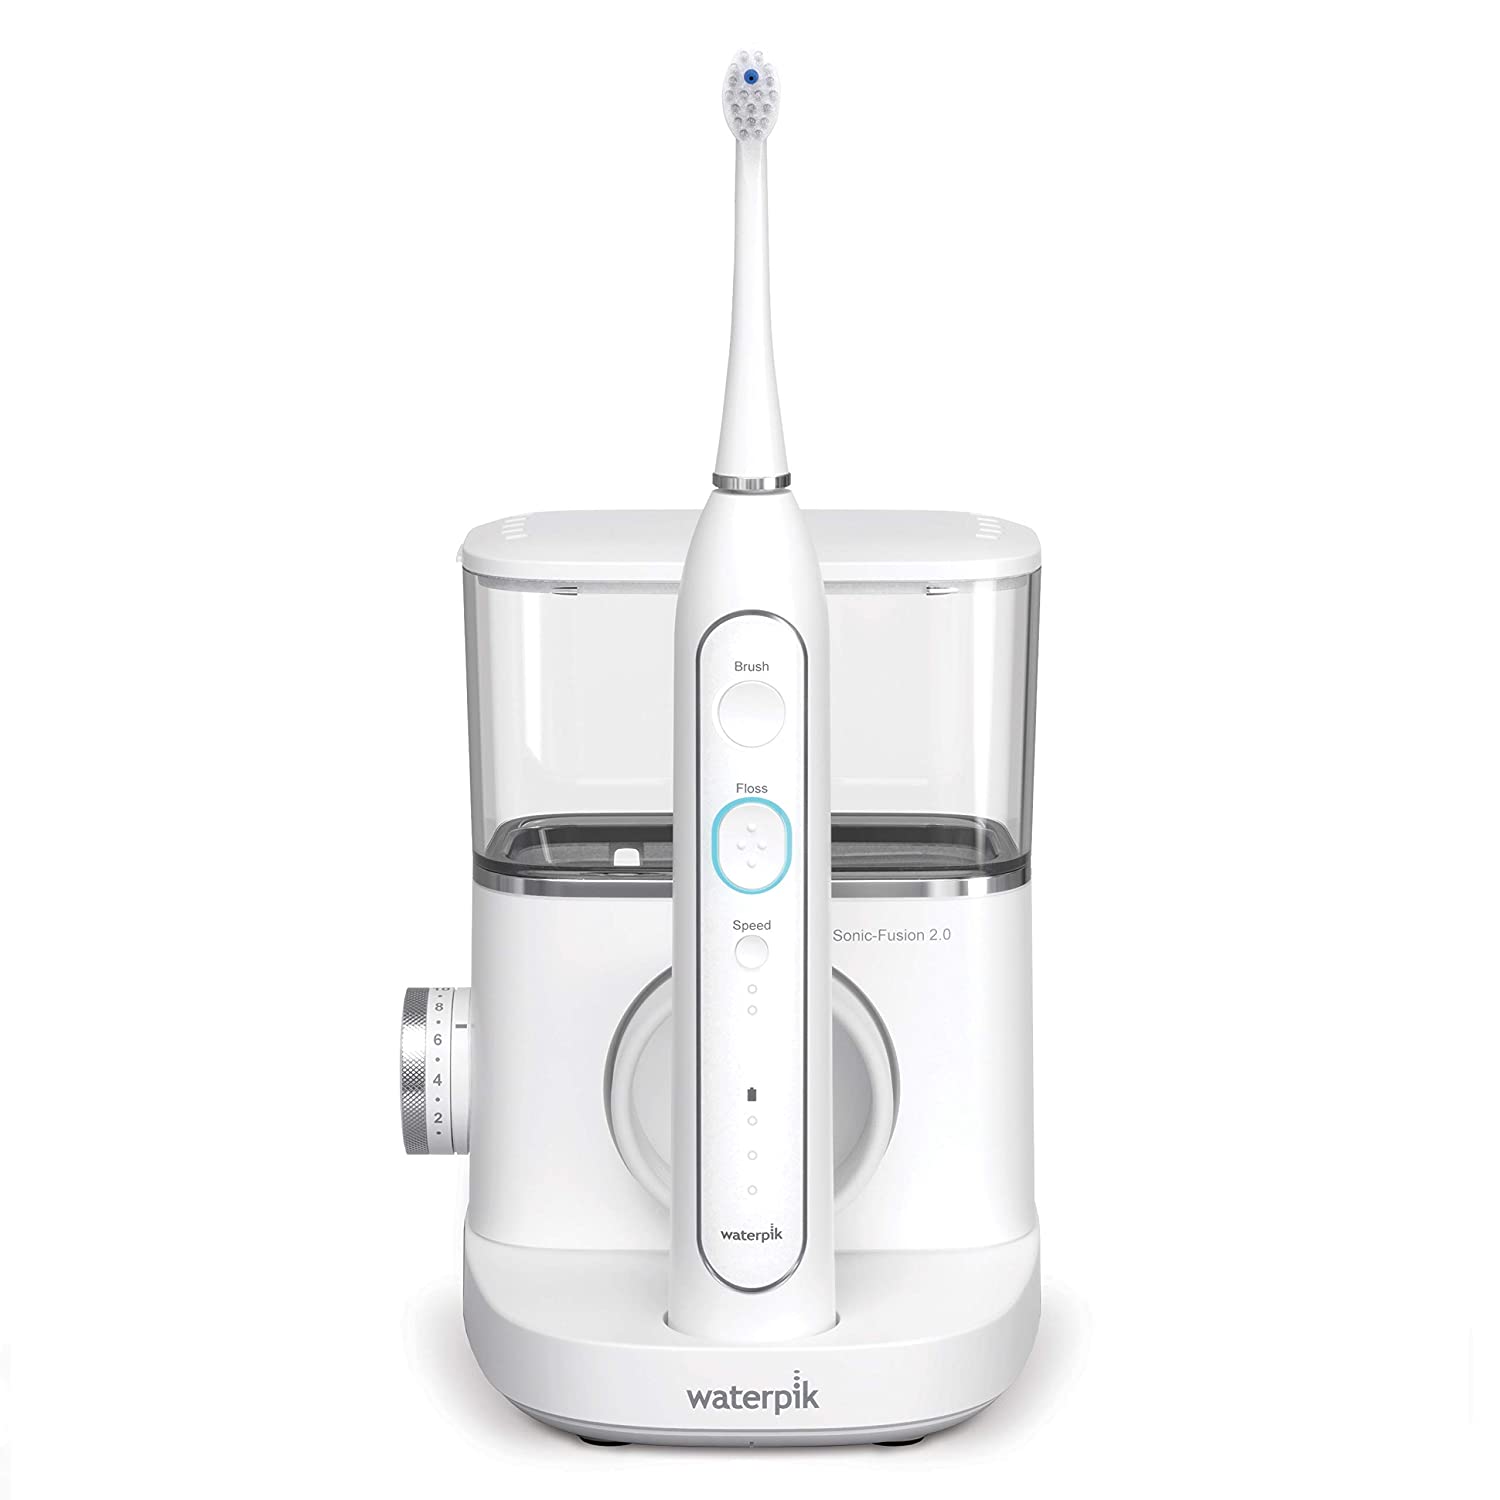 Waterpik Sonic-Fusion 2.0 ADA-Approved Electric Toothbrush